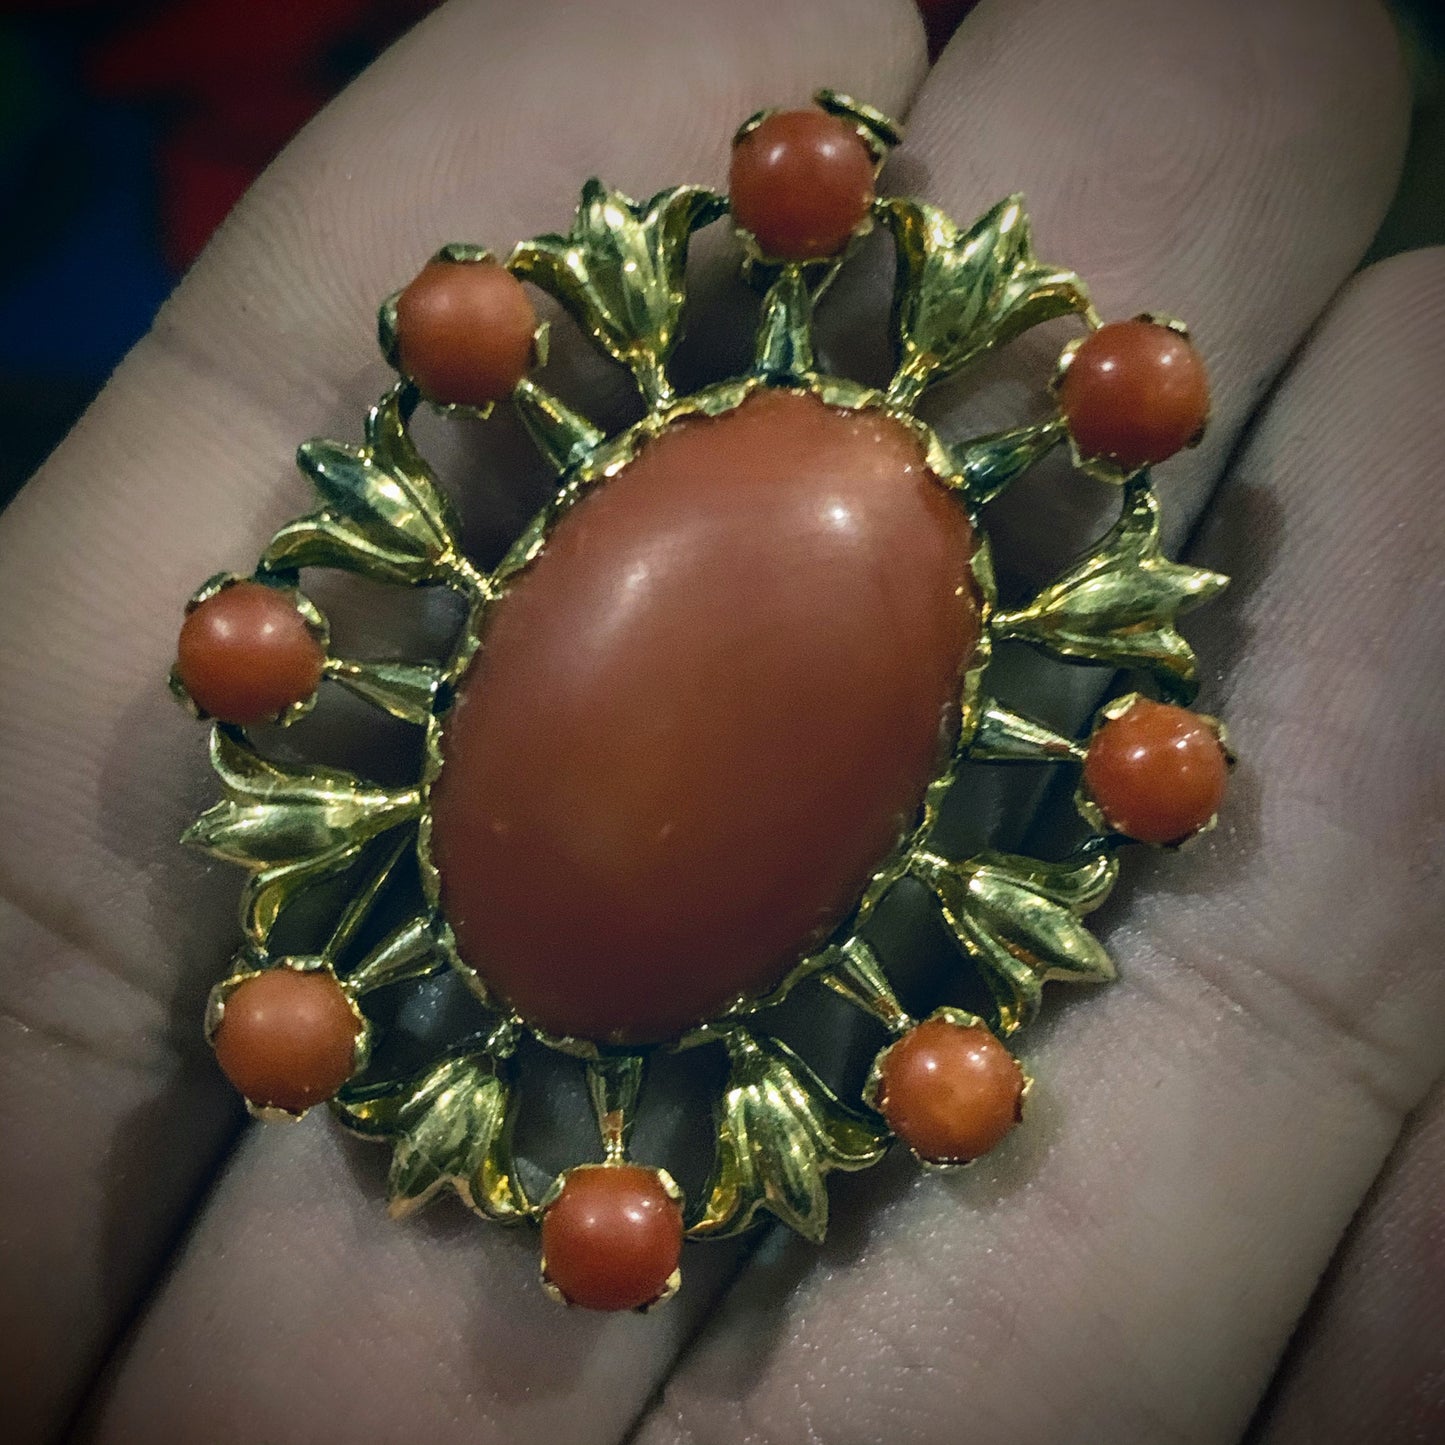 A vintage red coral brooch in 18kt setting